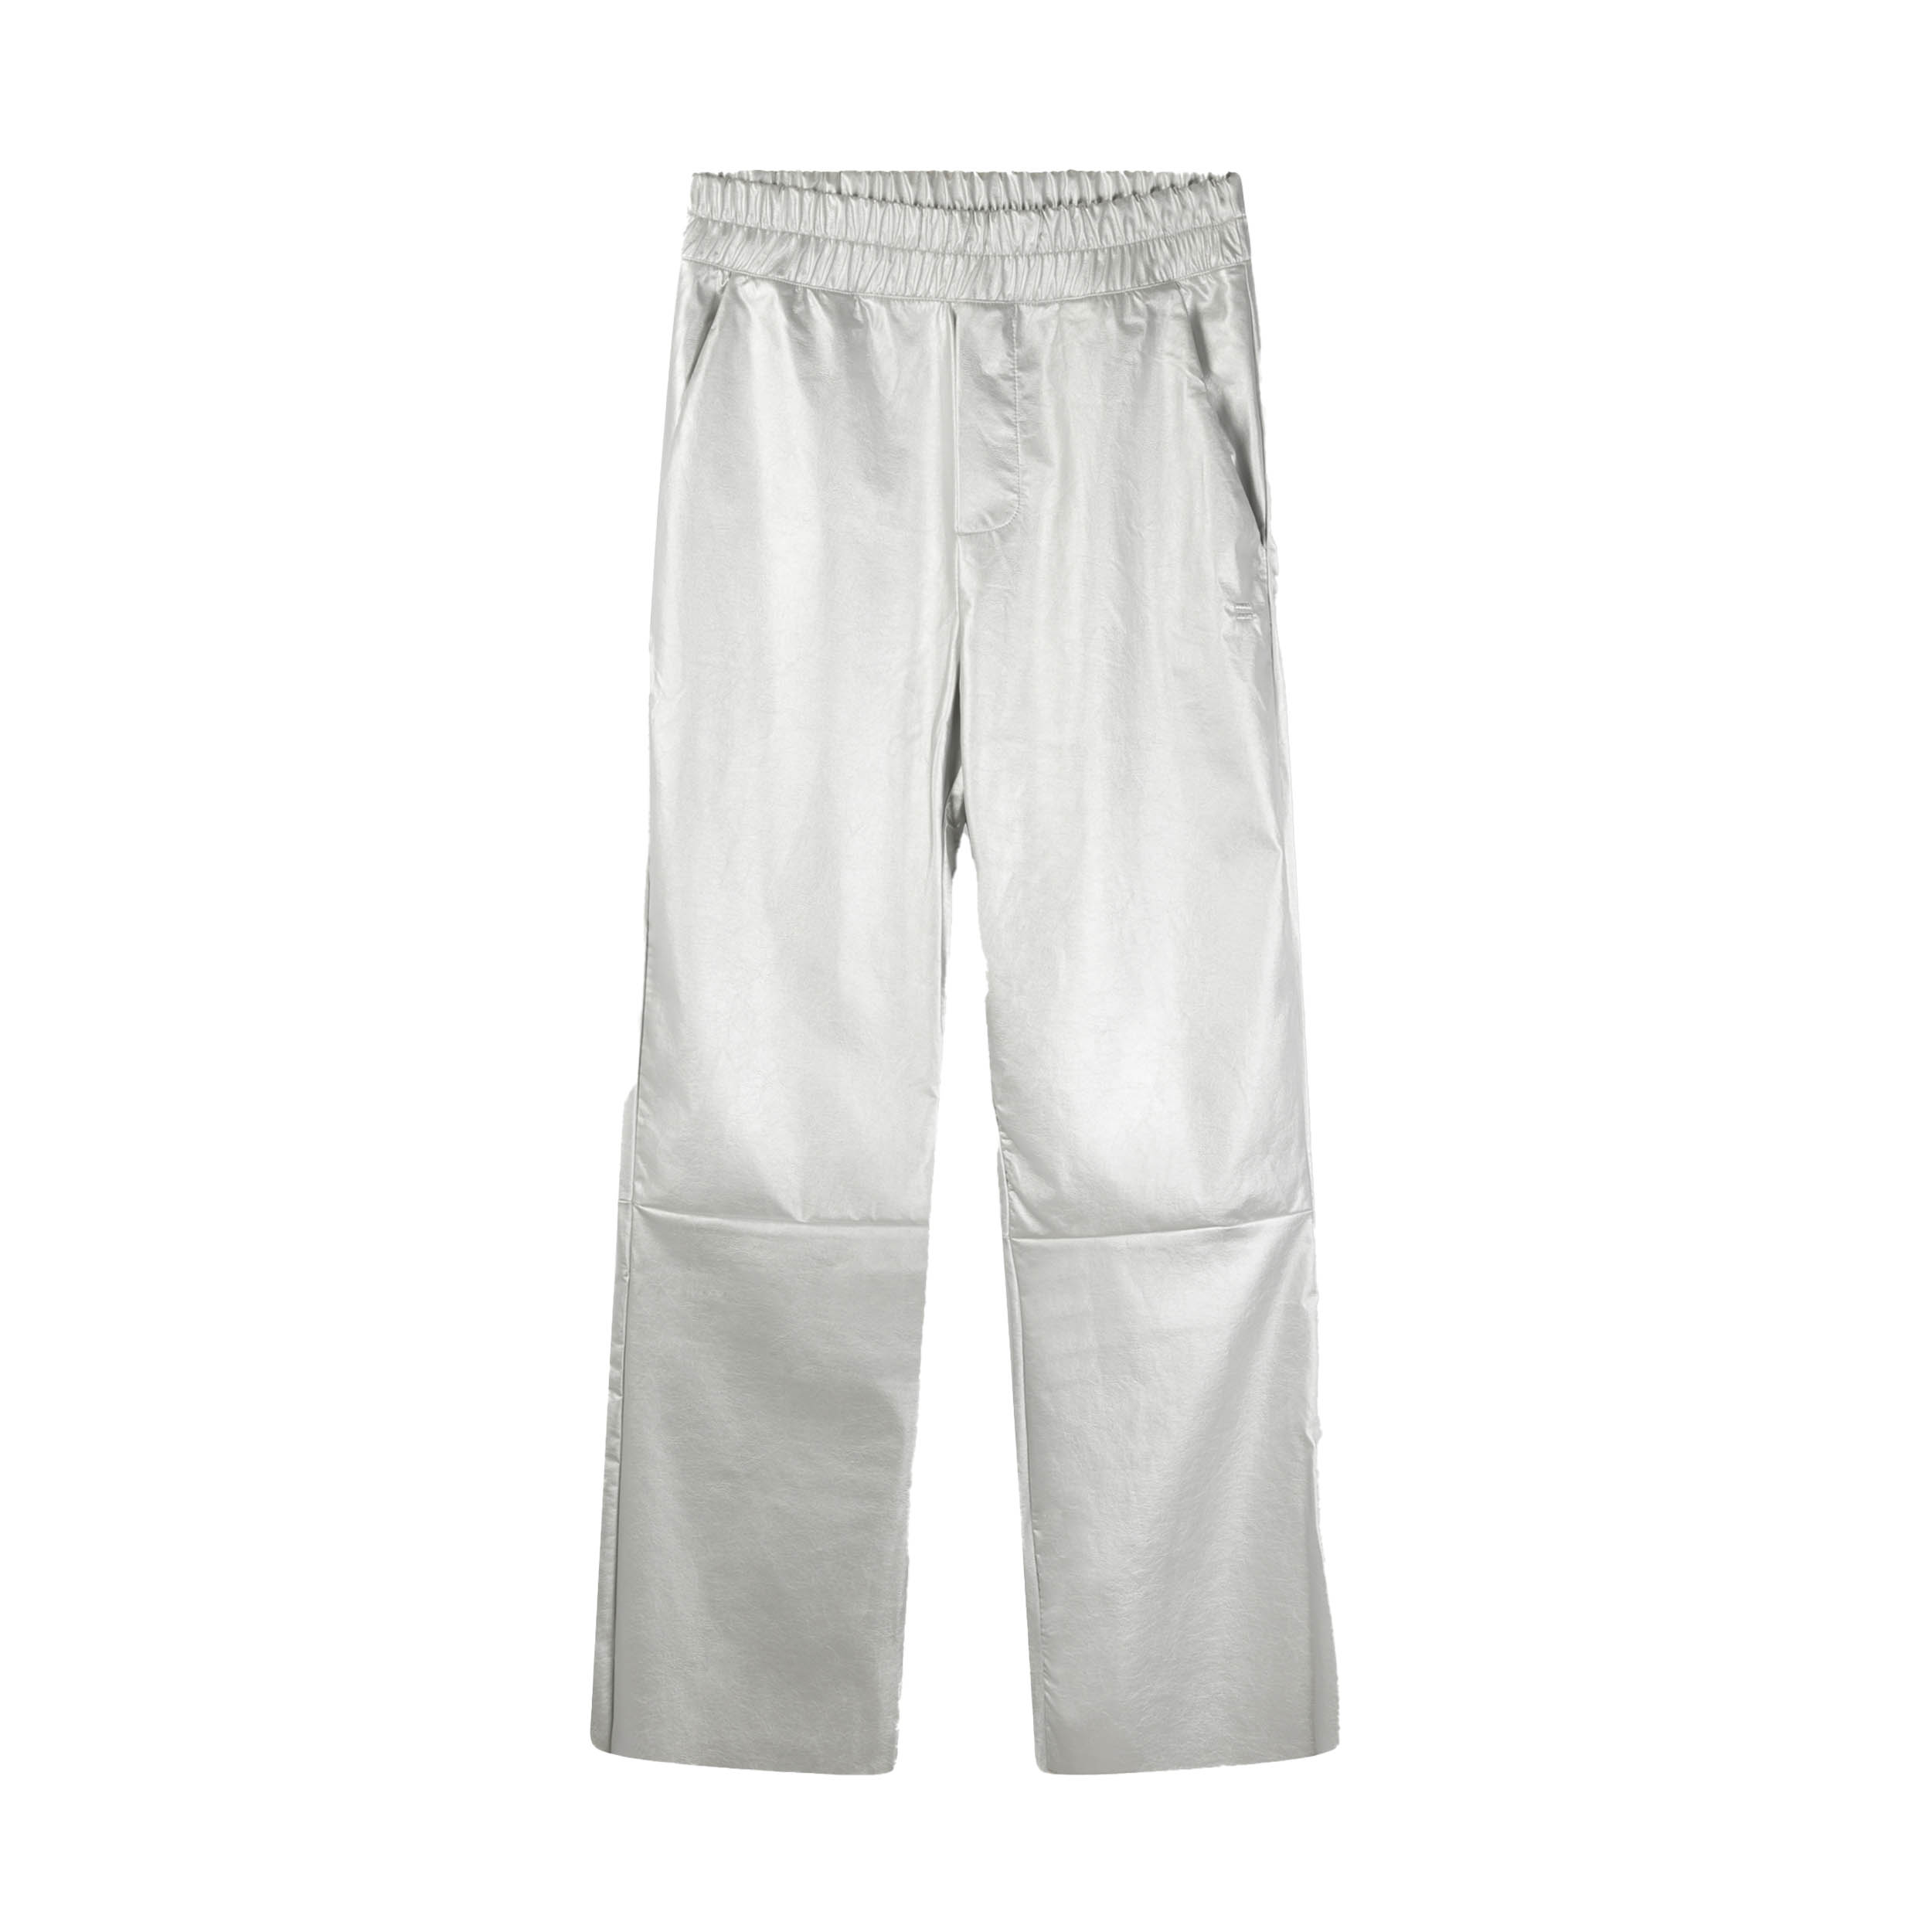 10DAYS Flared Pants Leatherlook Silver